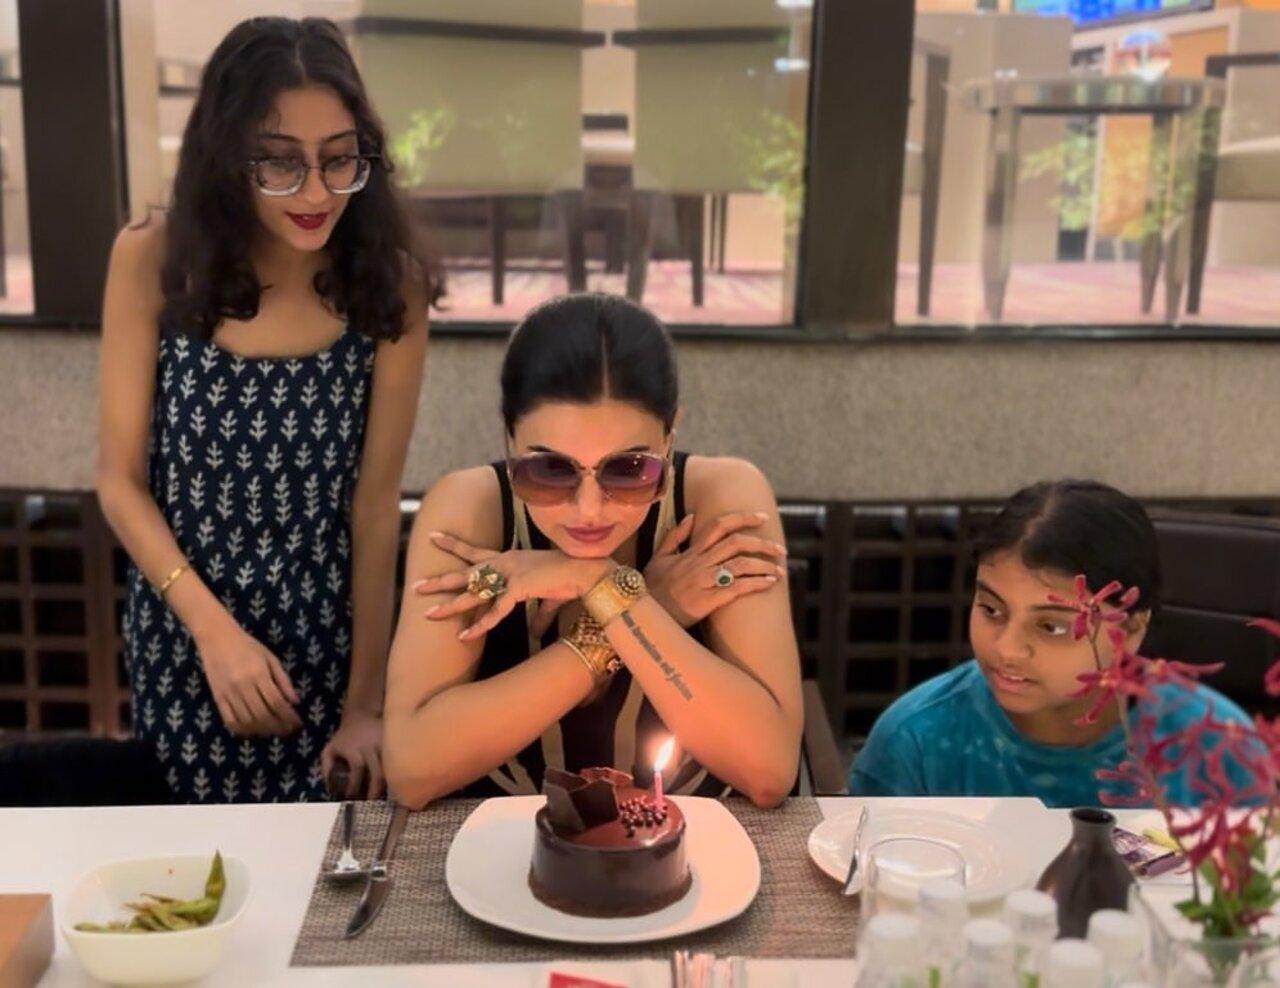 Sushmita Sen is a mother of two daughters- Renee Sen and Alisah Sen. She adopted her elder daughter Renee in 2000 and her second girl, Alisah, in 2010. To raise her daughters and give them the proper nurturance they require, Sushmita took a break her from acting career.